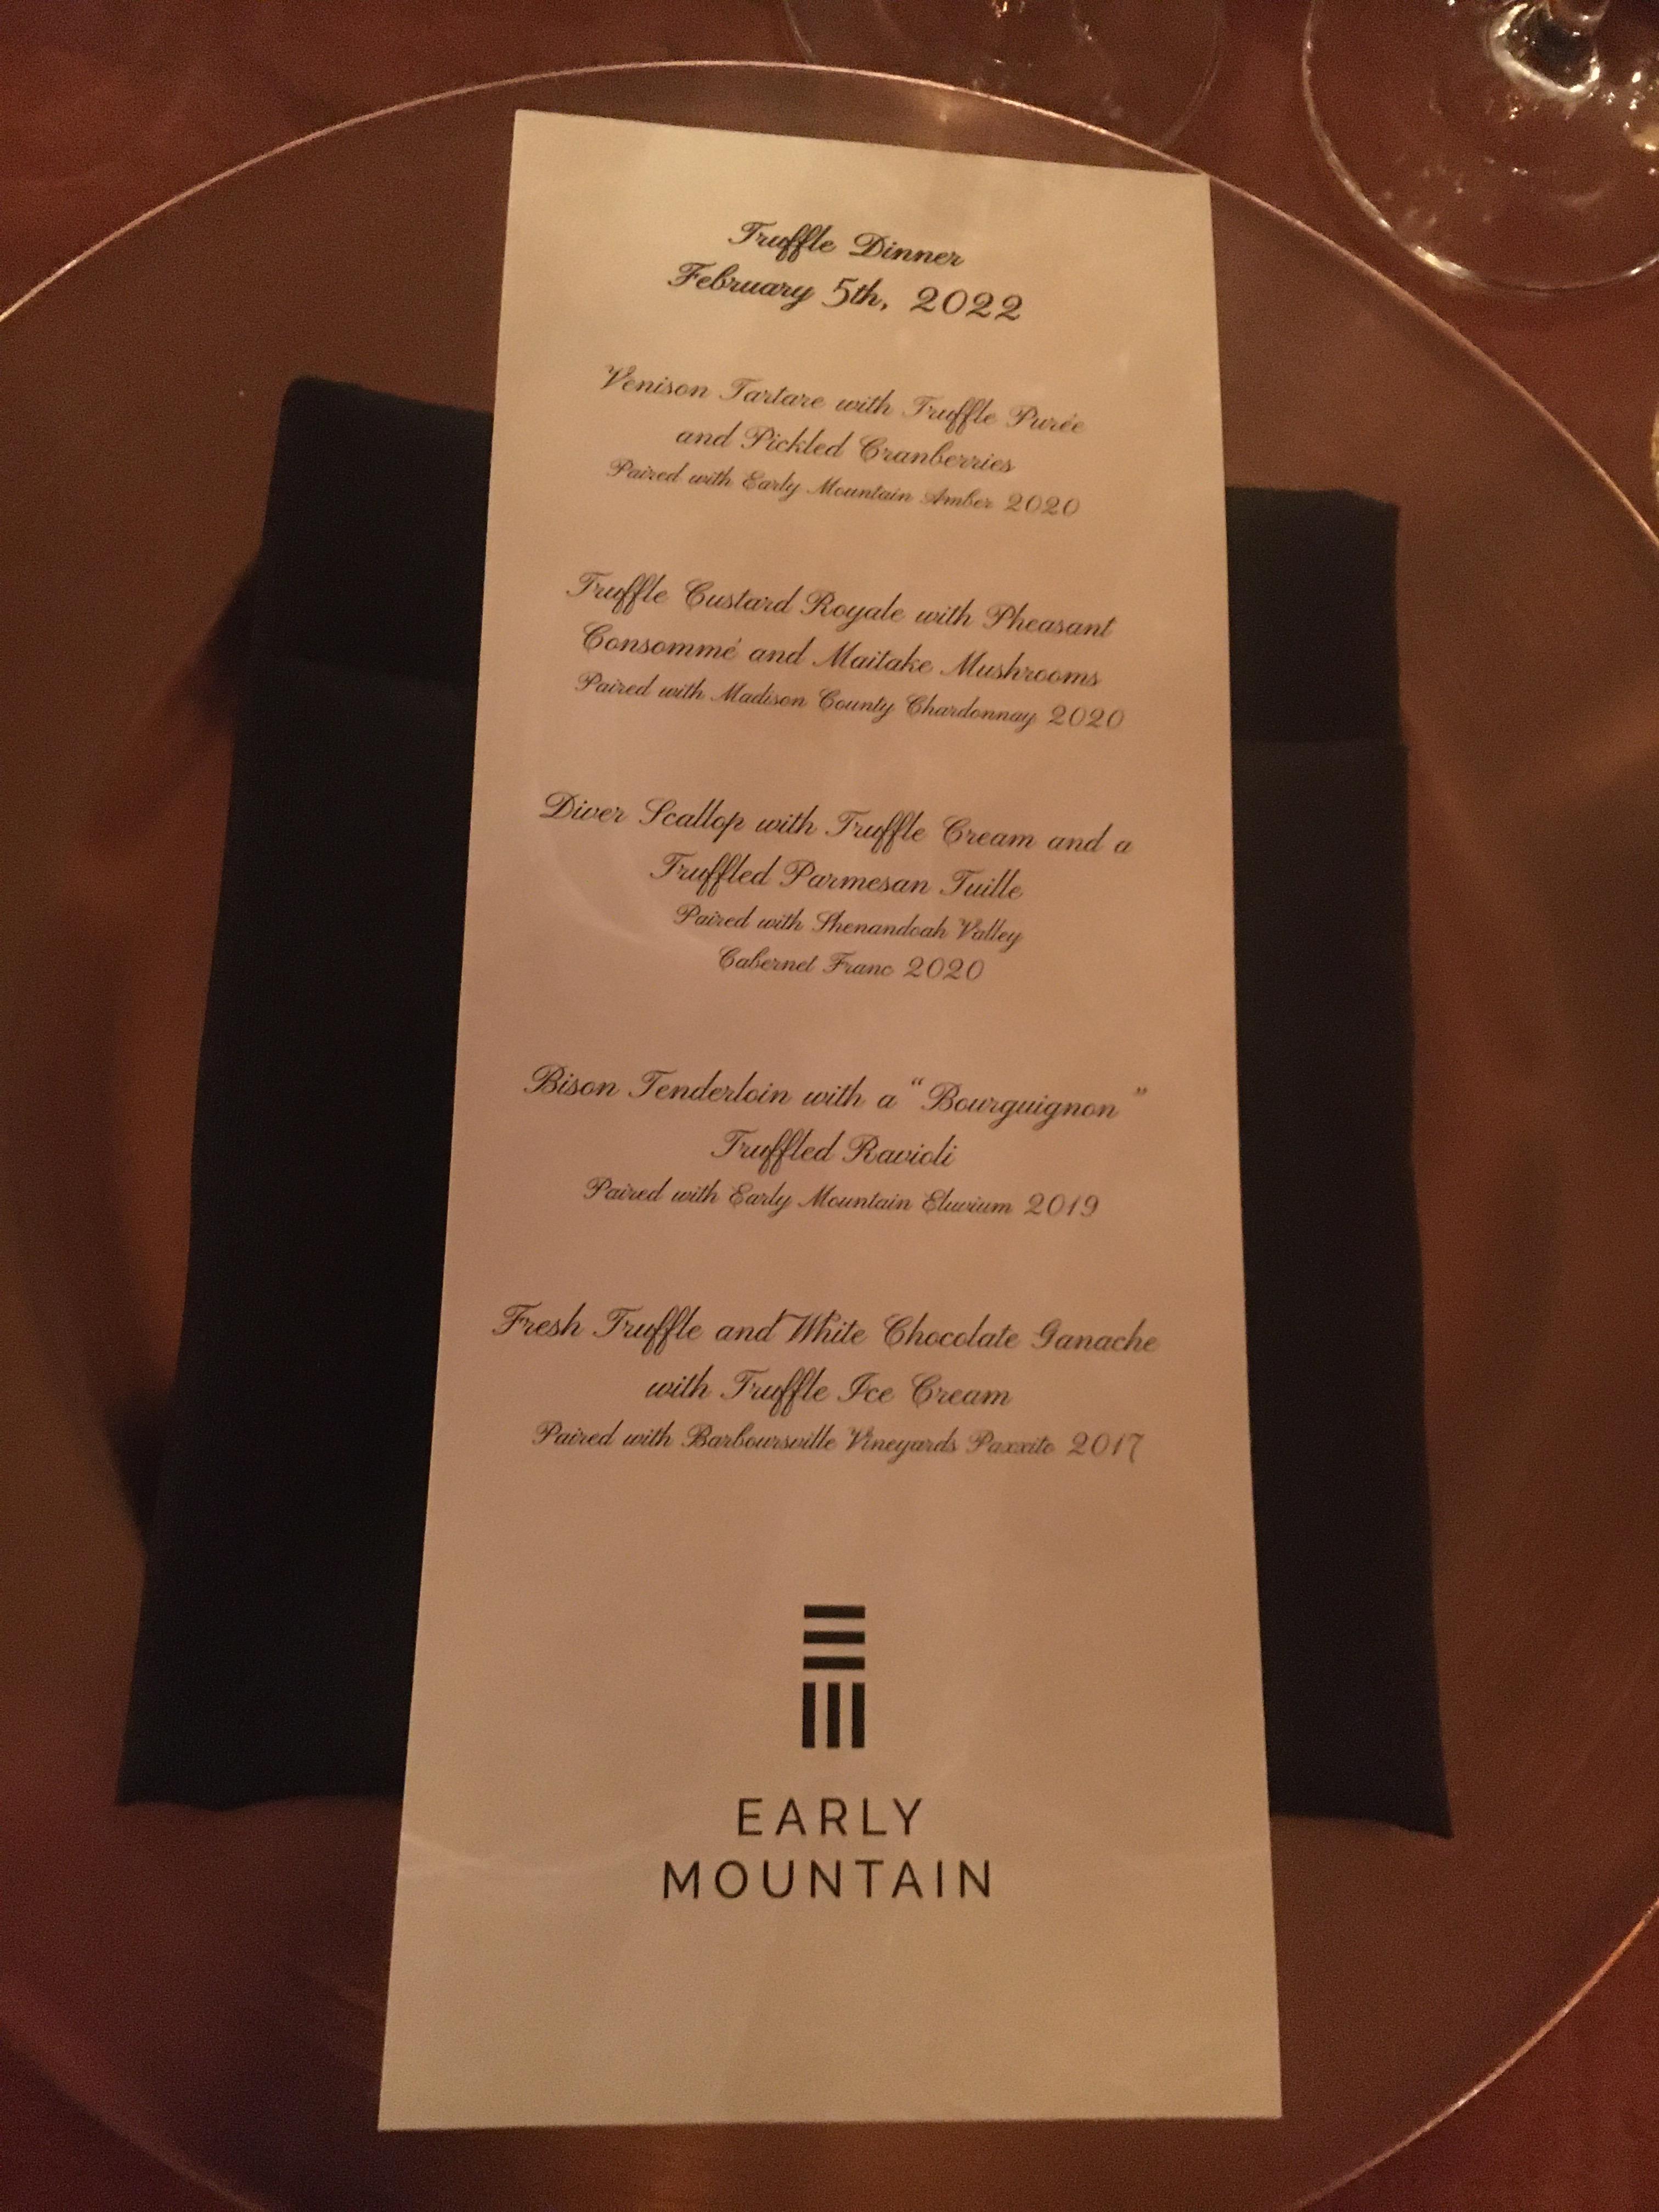 Fabulous dinner menu prepared by the chef at Early Mountain Vineyards